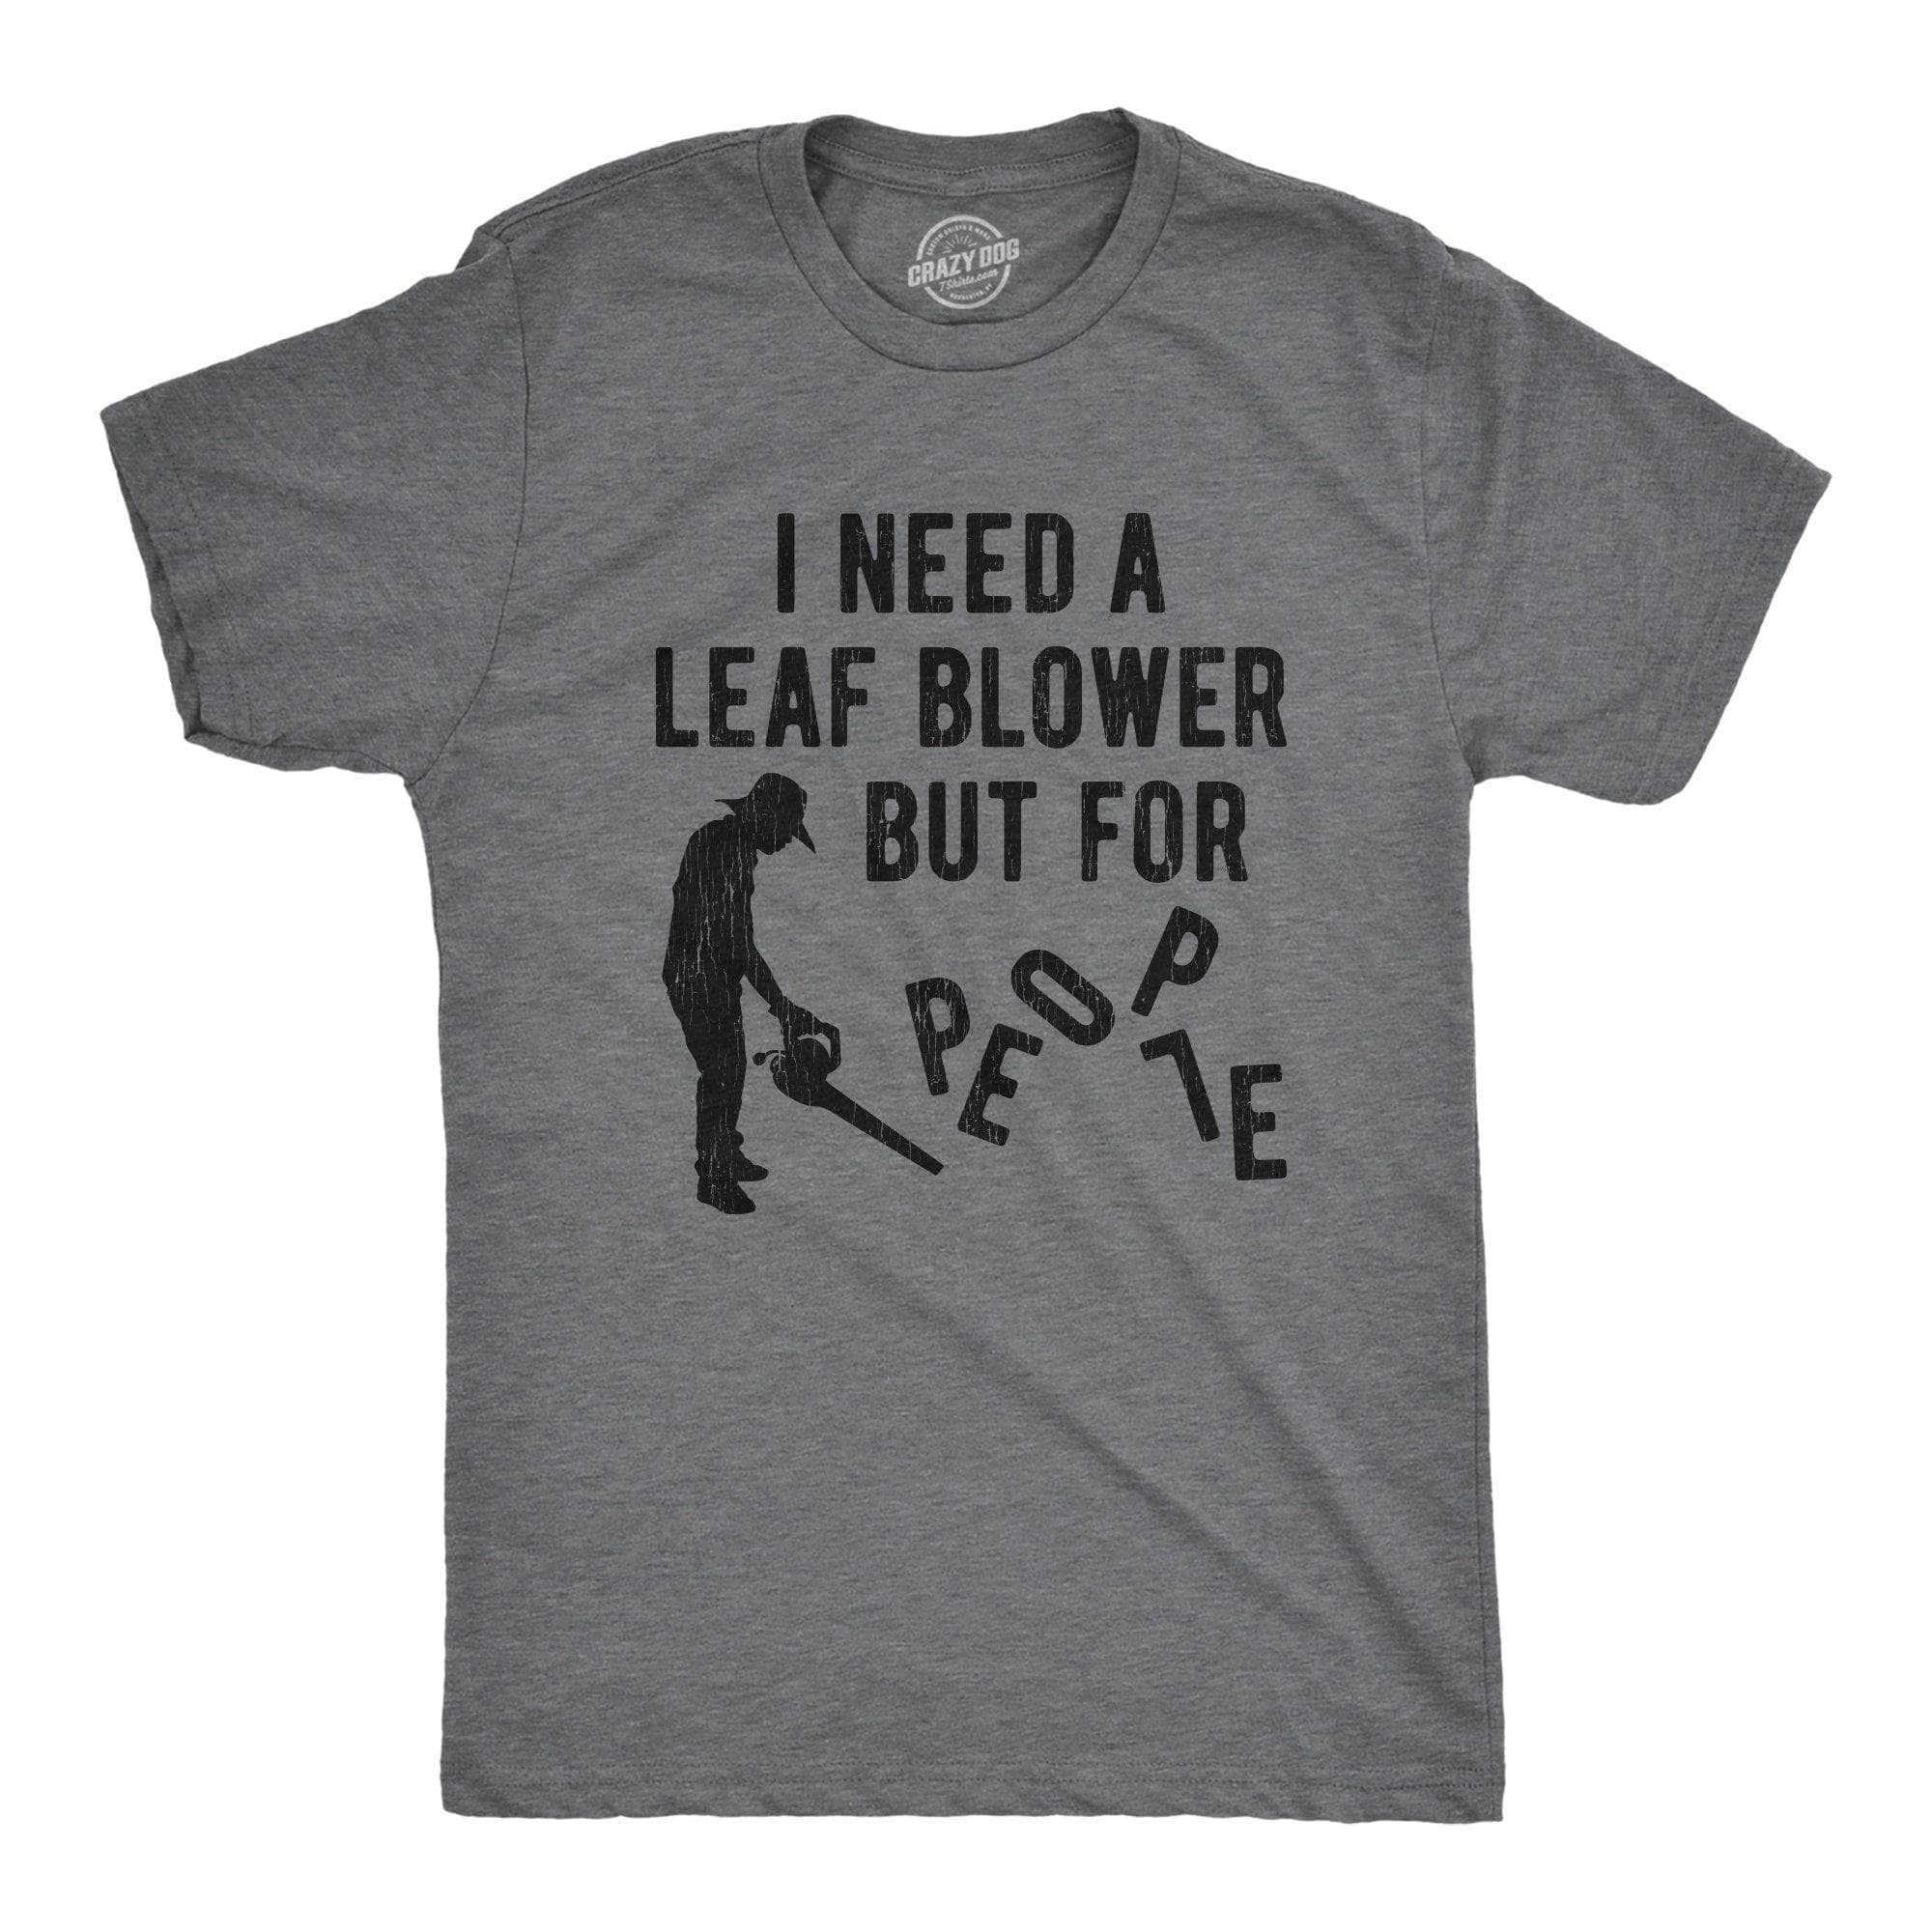 I Need A Leaf Blower But For People Men's Tshirt - Crazy Dog T-Shirts